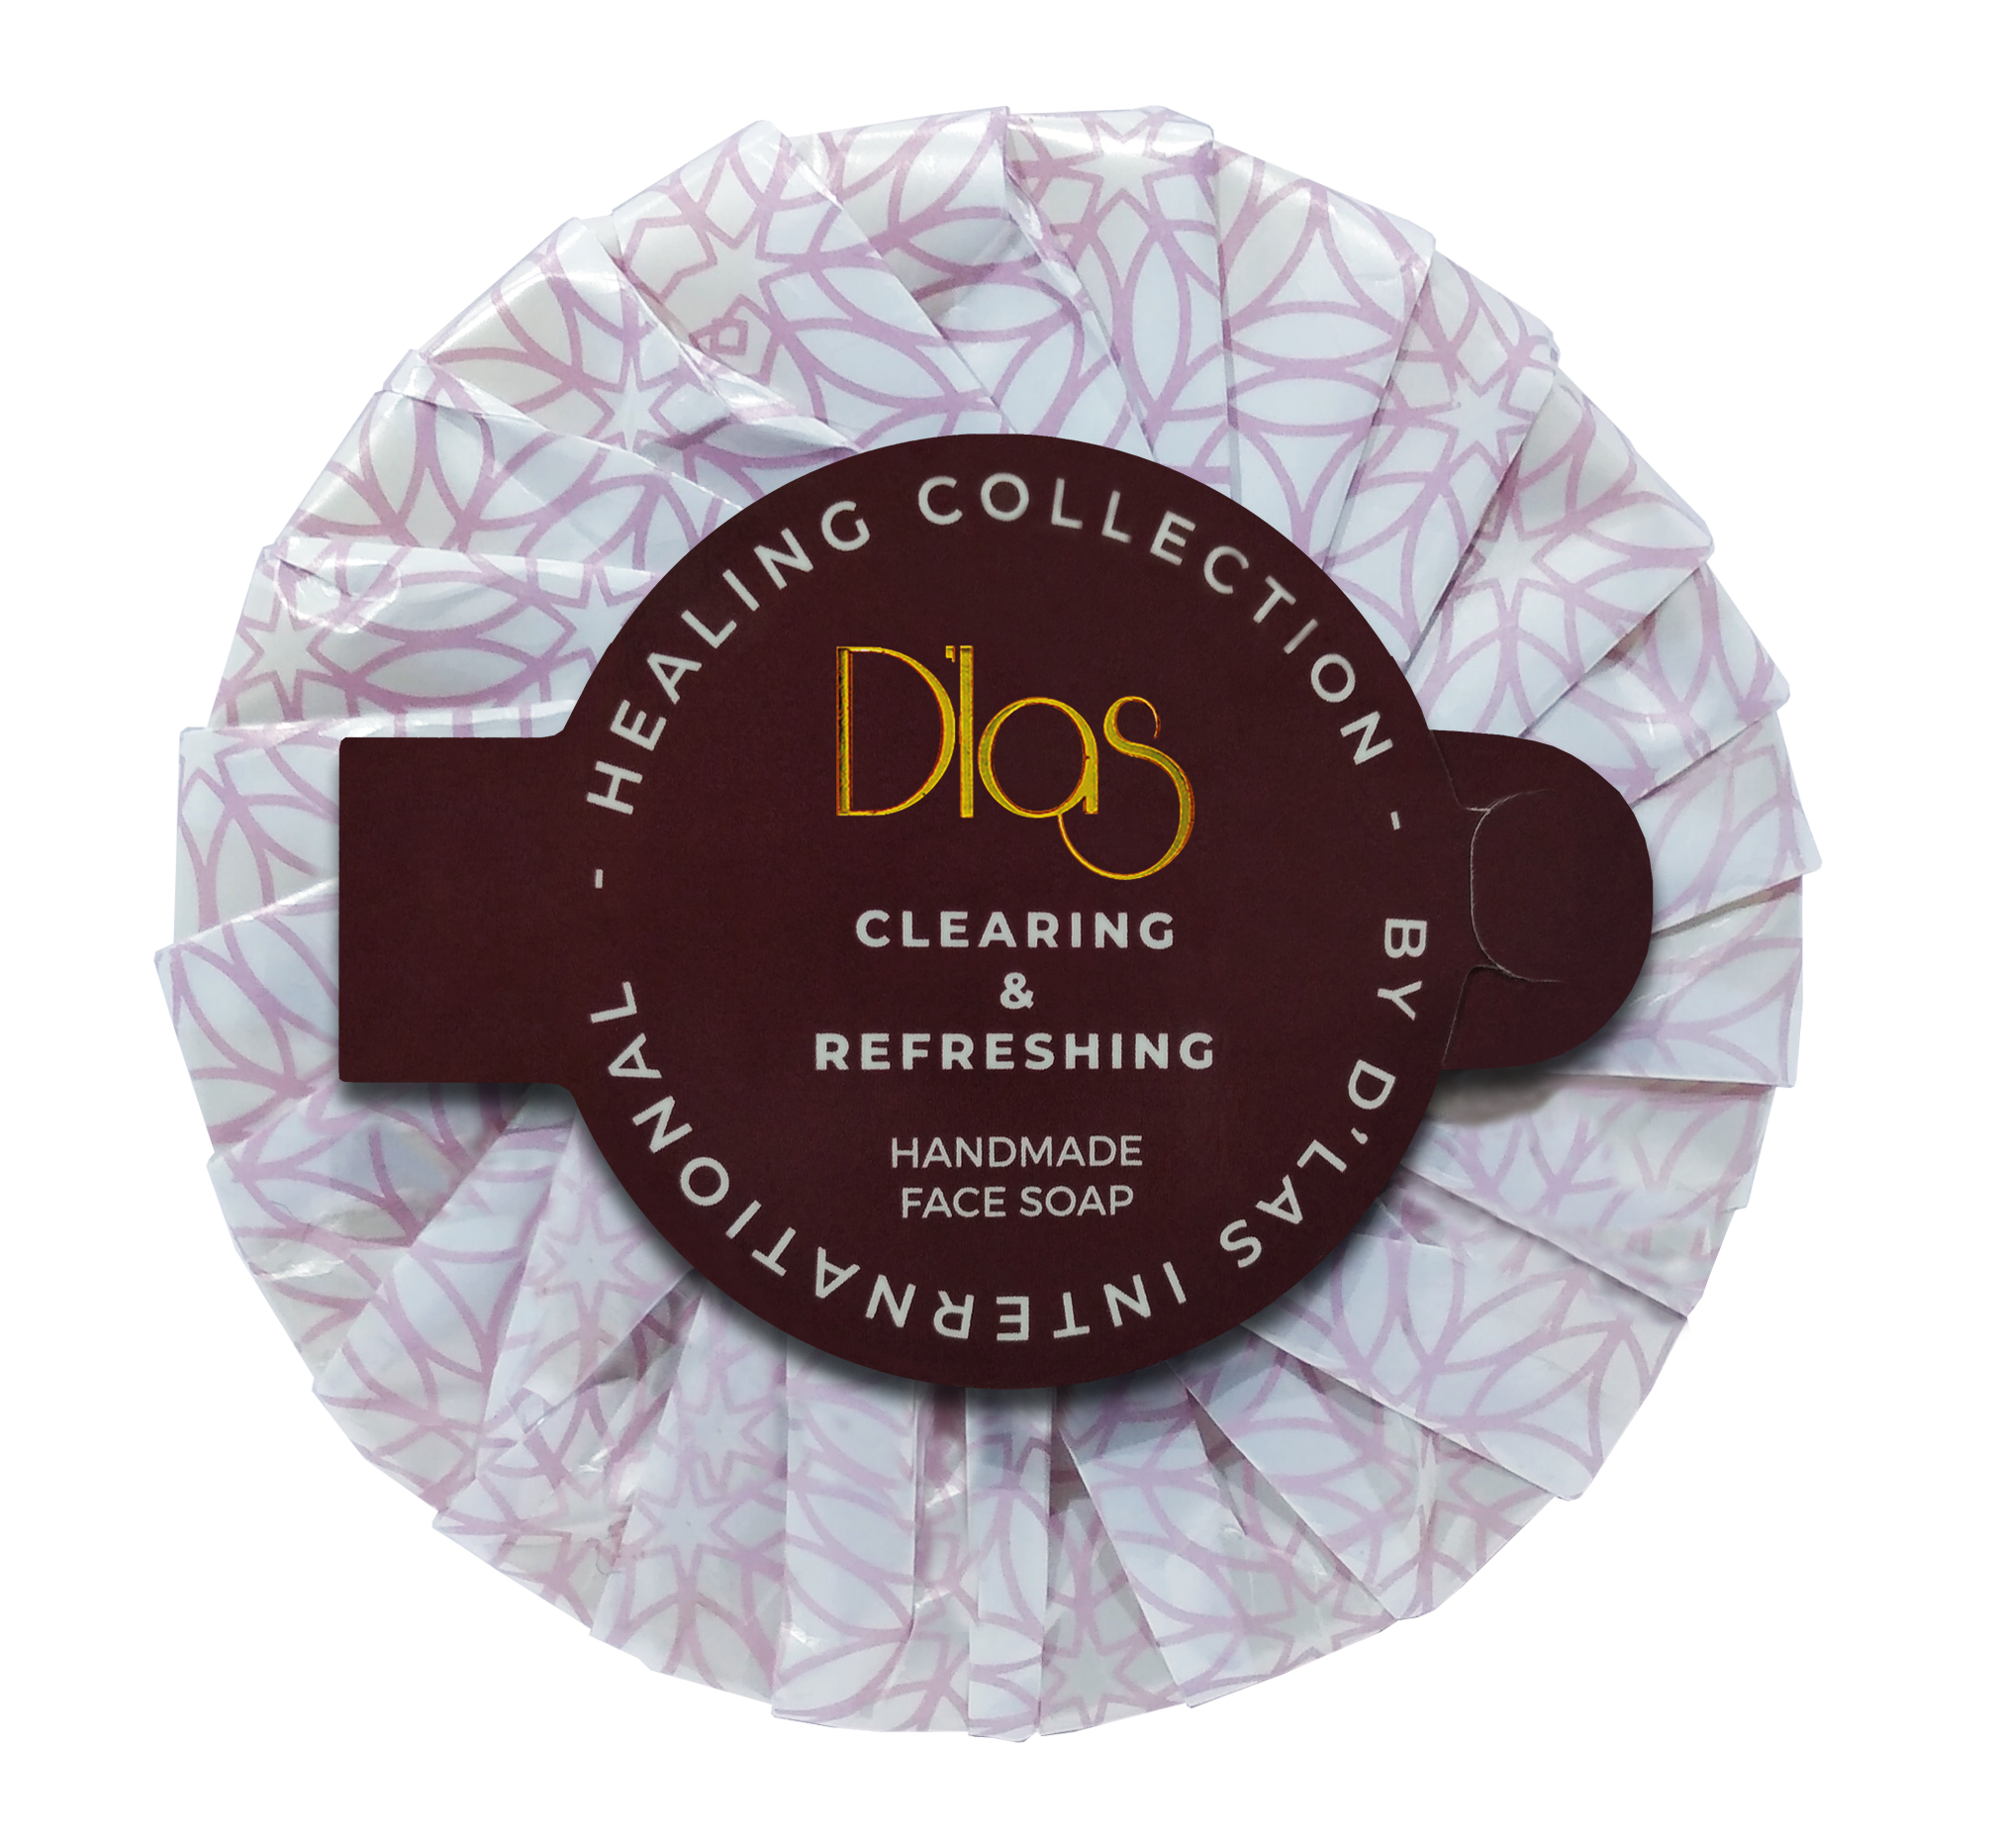 Clearing & Refreshing Handmade Face Soap